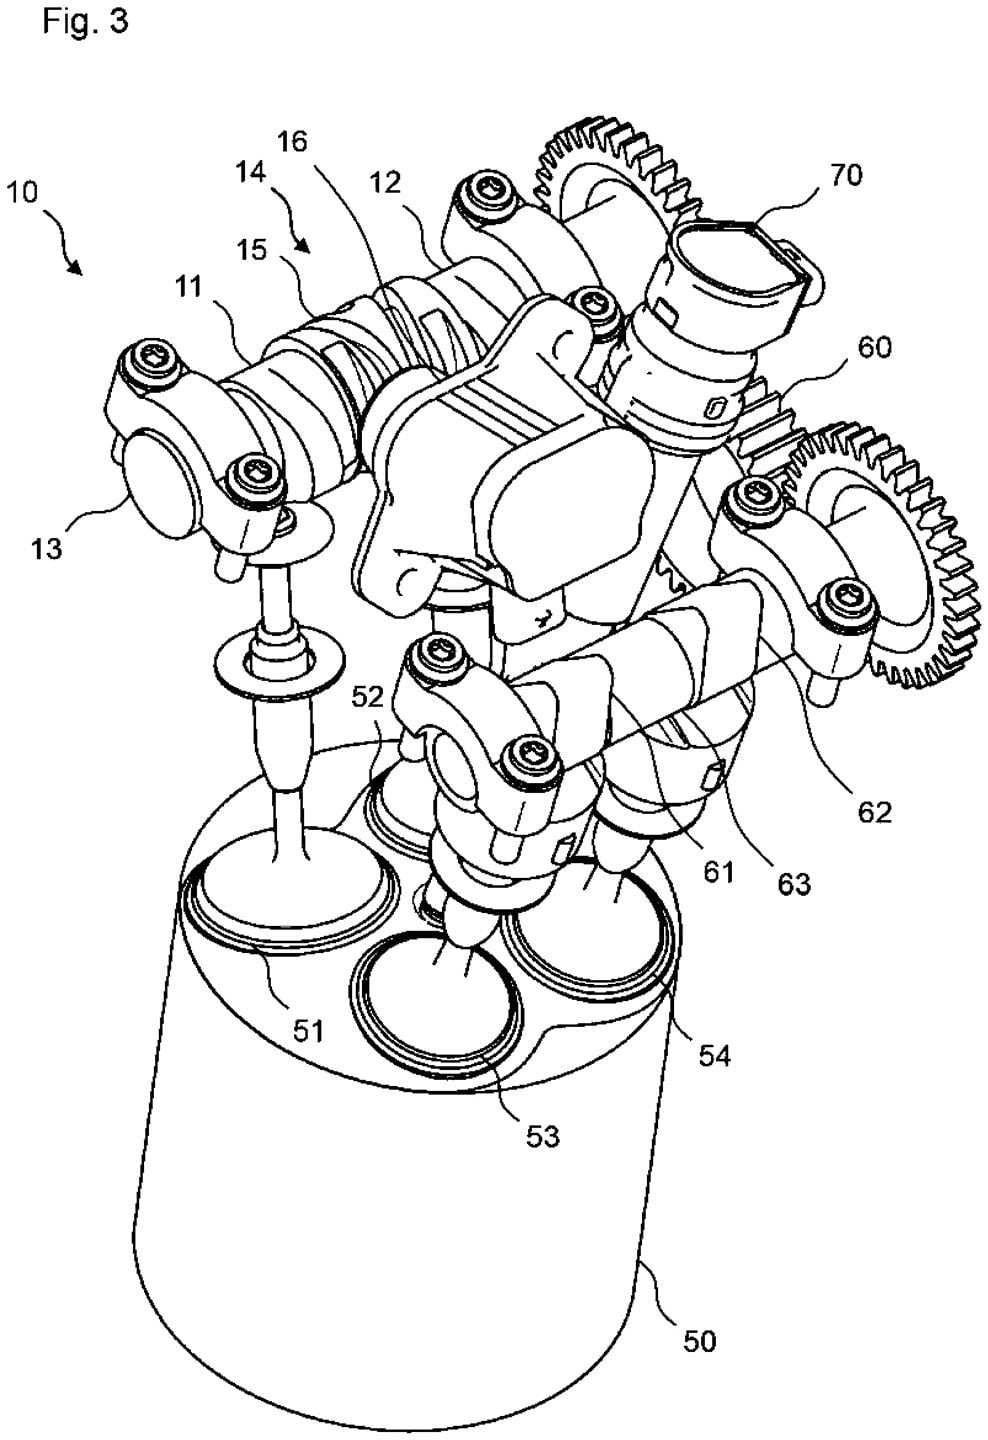 BMW ShiftCam patent drawings show solenoid in the middle of the intake cam, where it works on the spiral grooves to switch between low-speed and high-speed cam profiles.